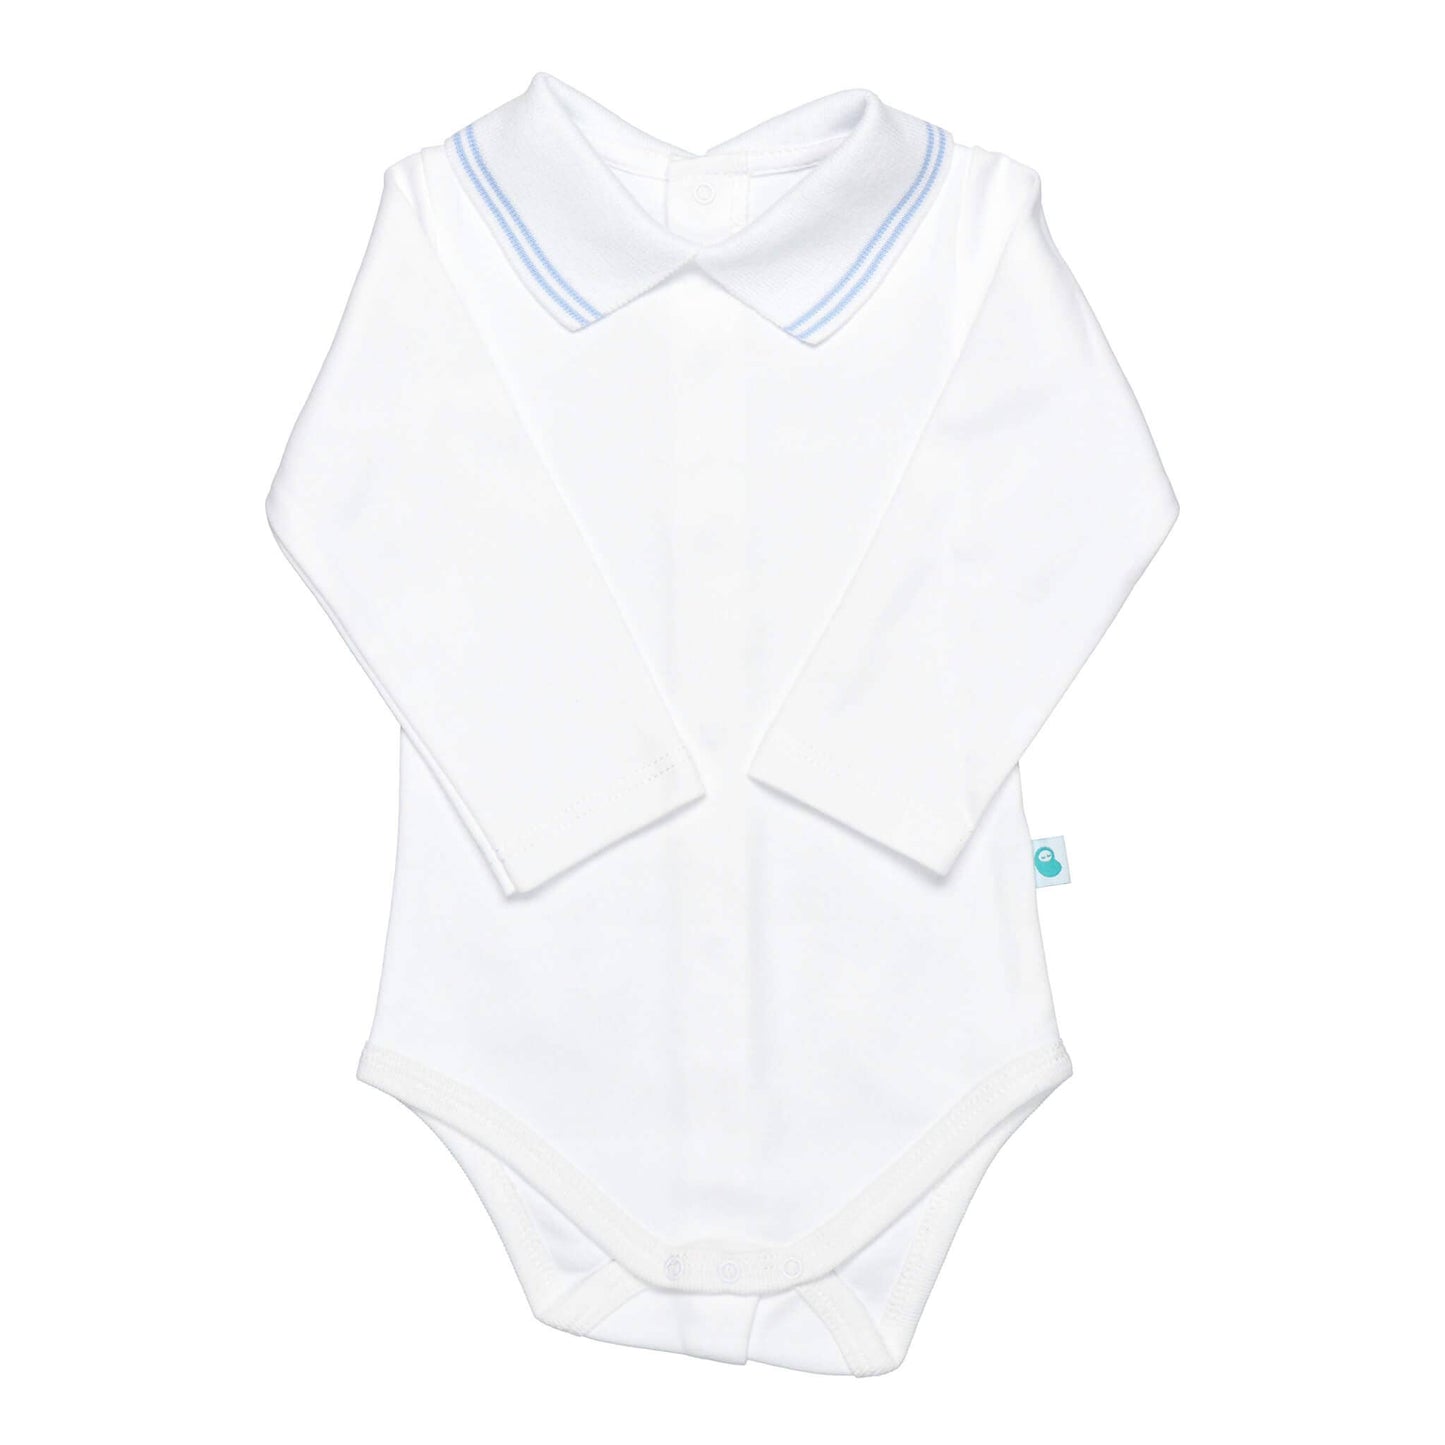 Cotton Baby Bodysuit Onesie with Polo-Style Collar: 0-1M / Short Sleeve / Light Blue